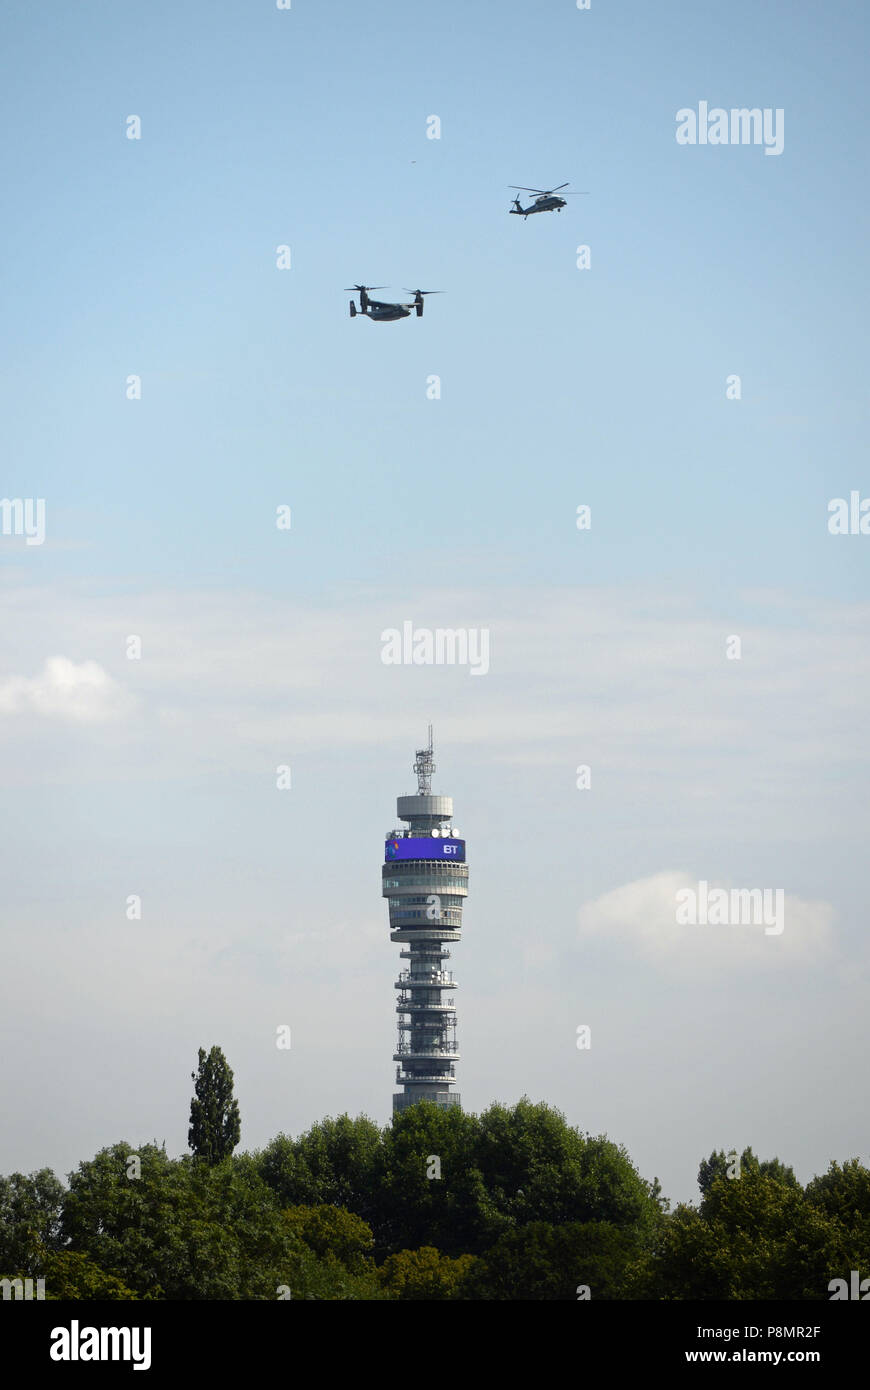 Two US Marine Corps helicopters fly above the Telecom Tower in London as US President Donald Trump travels from Stansted airport to the US ambassador's residence in Regent's Park where he is spending Wednesday night. Stock Photo